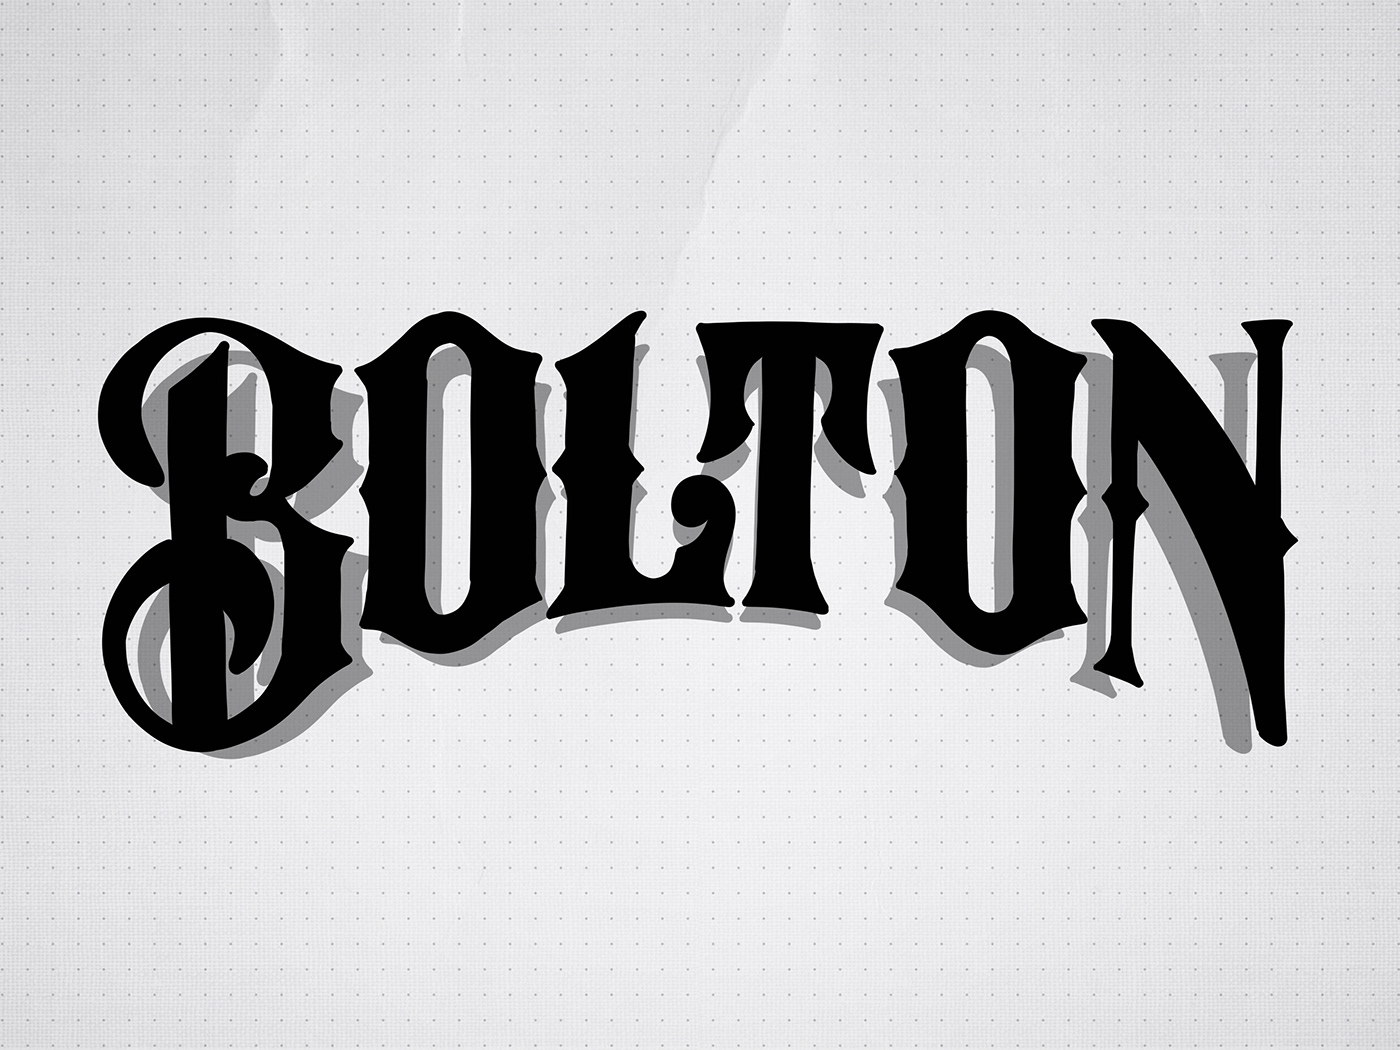 arms bolton crest heraldry lettering